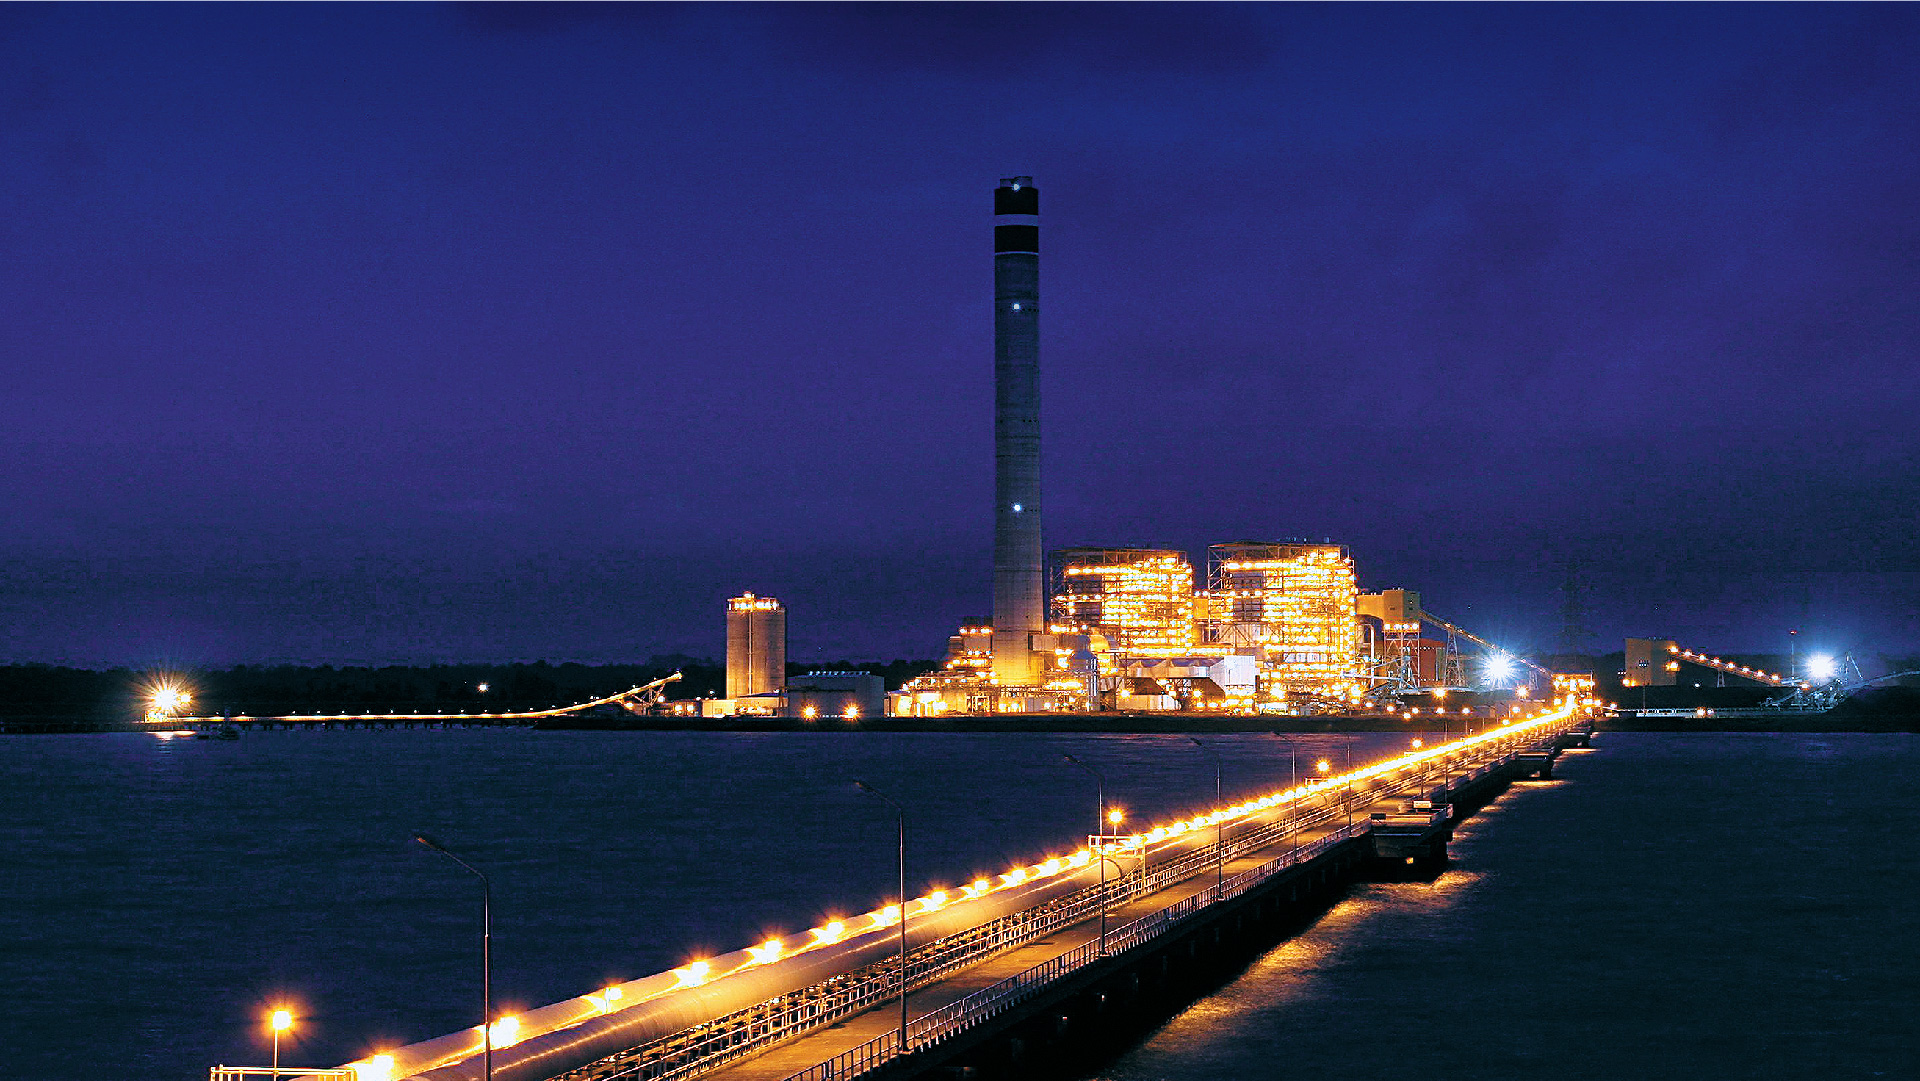 For a stable power supply Types and characteristics of major thermal power generation systems